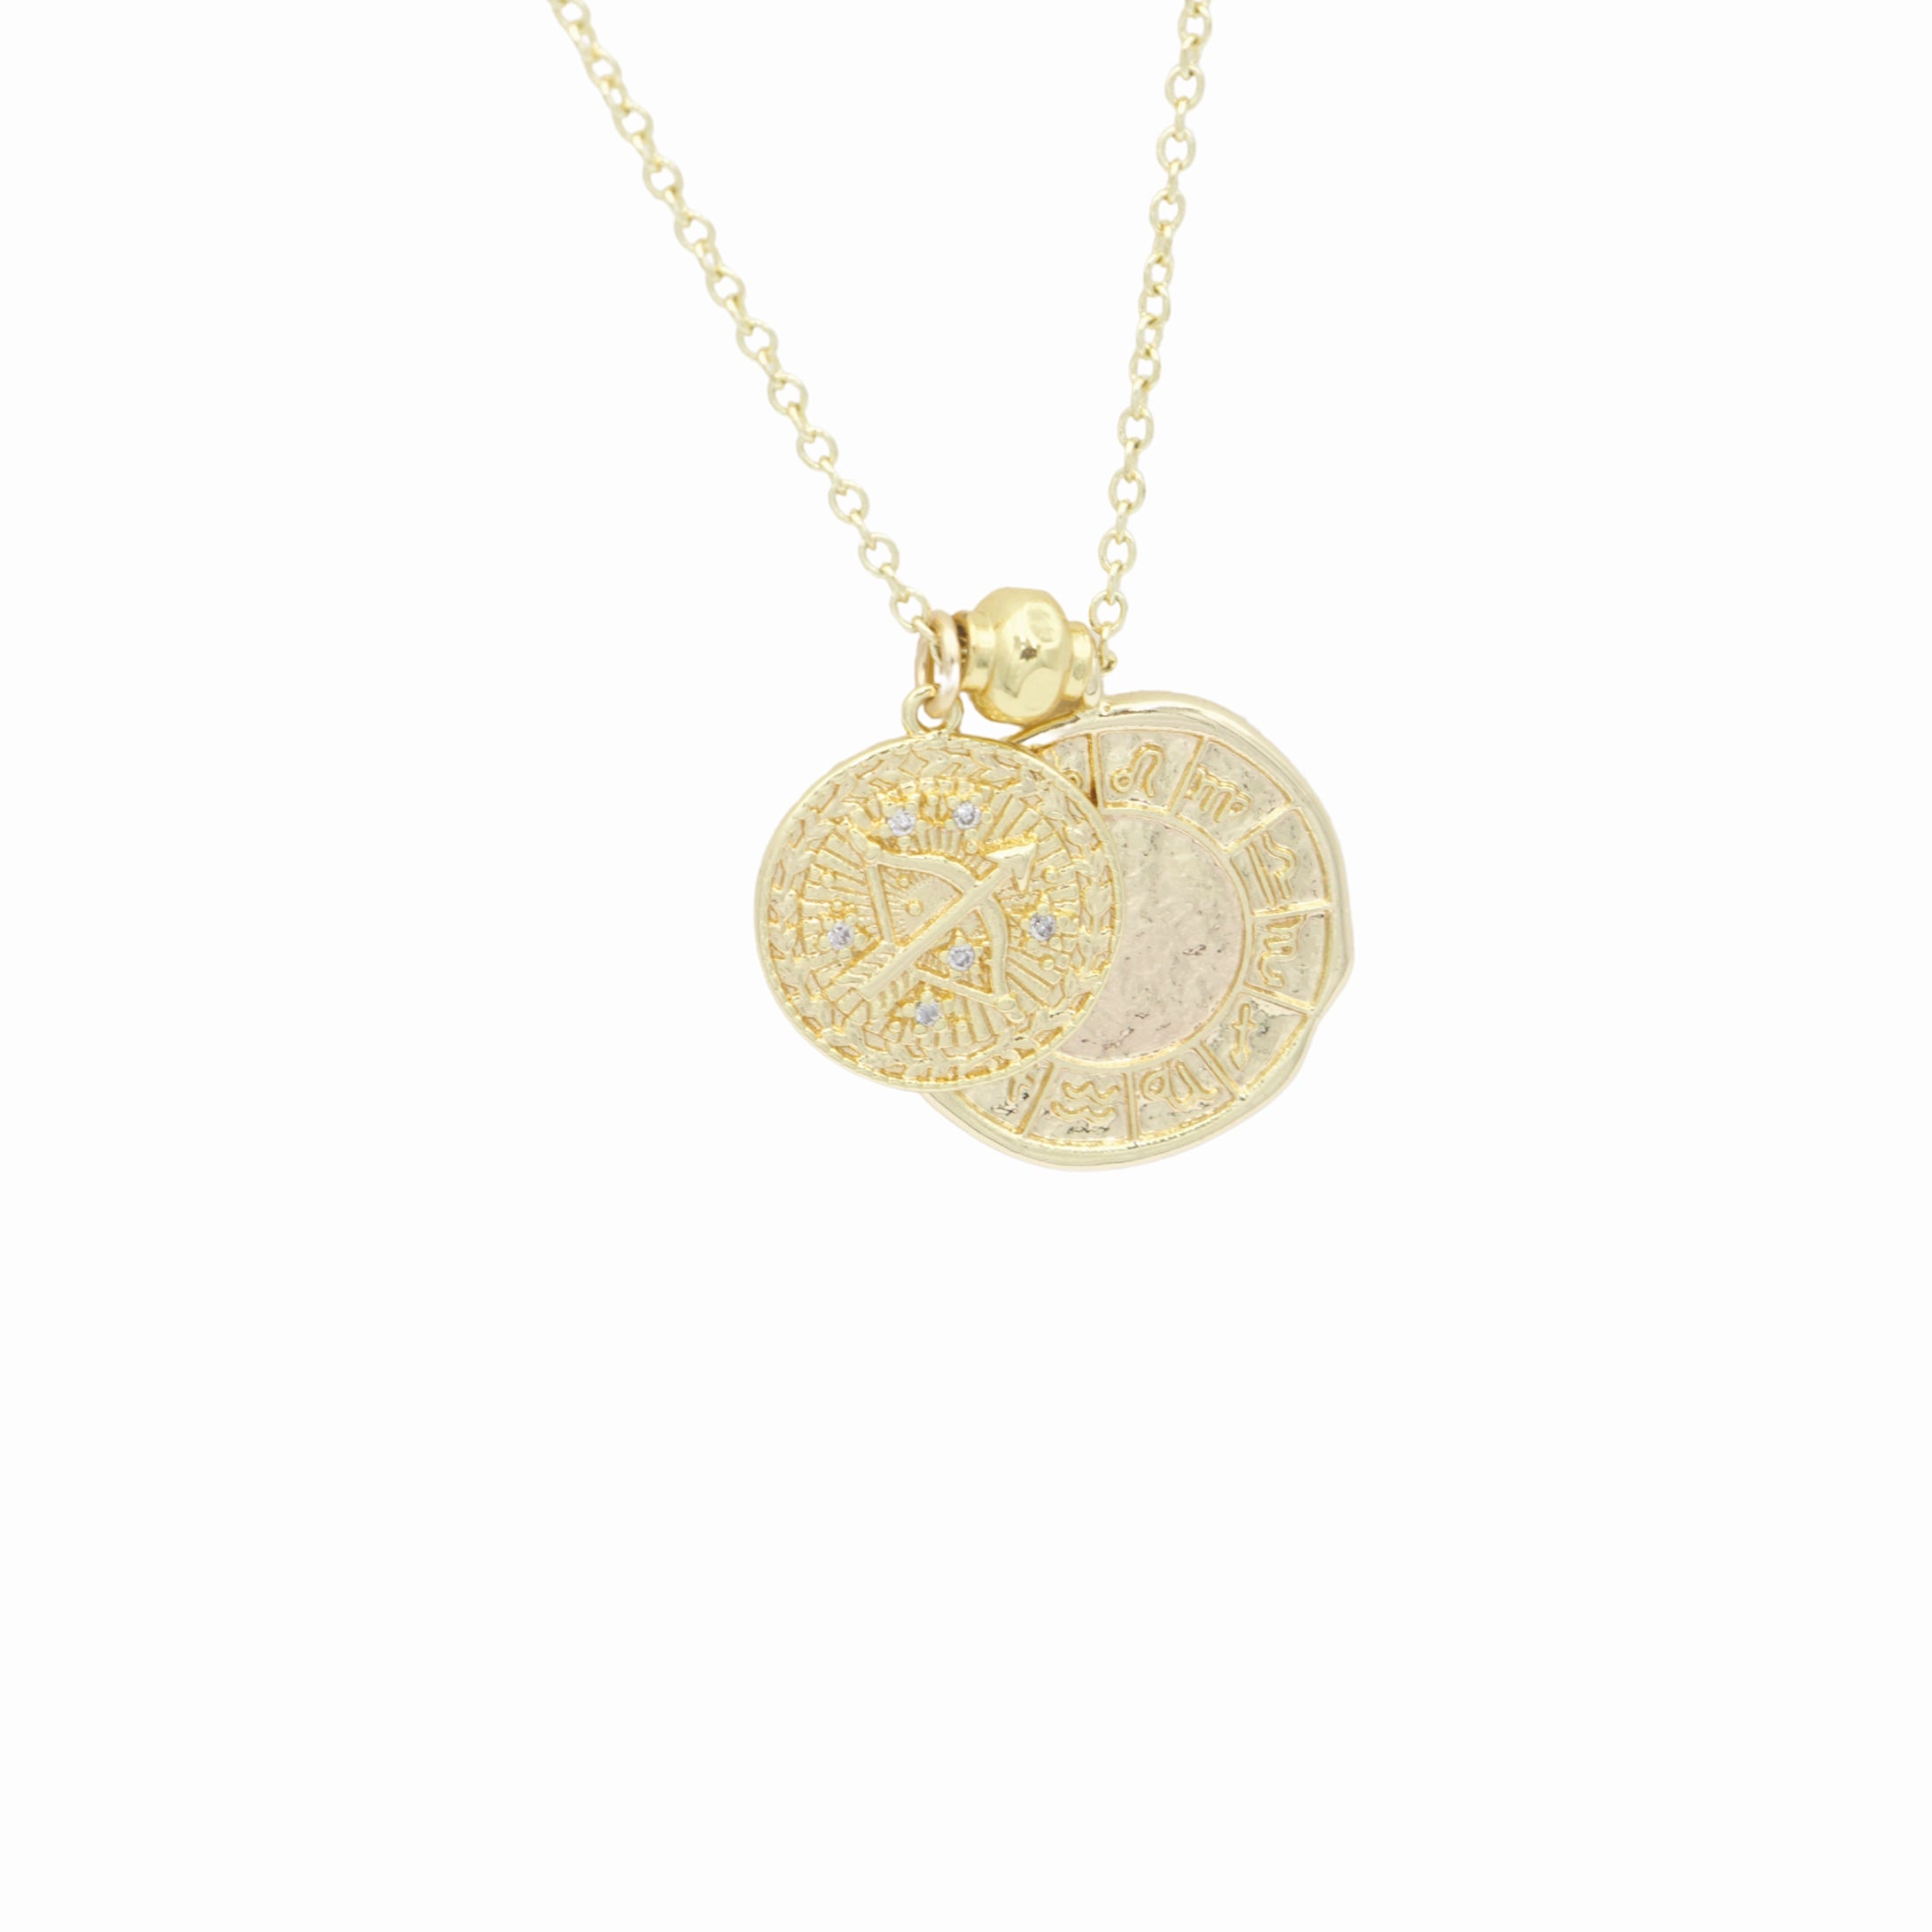 AW Boutique's dual zodiac coin necklace featuring a dainty necklace chain, zodiac rustic coin charm, and your chosen star sign coin charm. Charms separated by a gold bead. Part of the Celestial Collection. Gold filled jewellery. Option shown is Sagittarius.